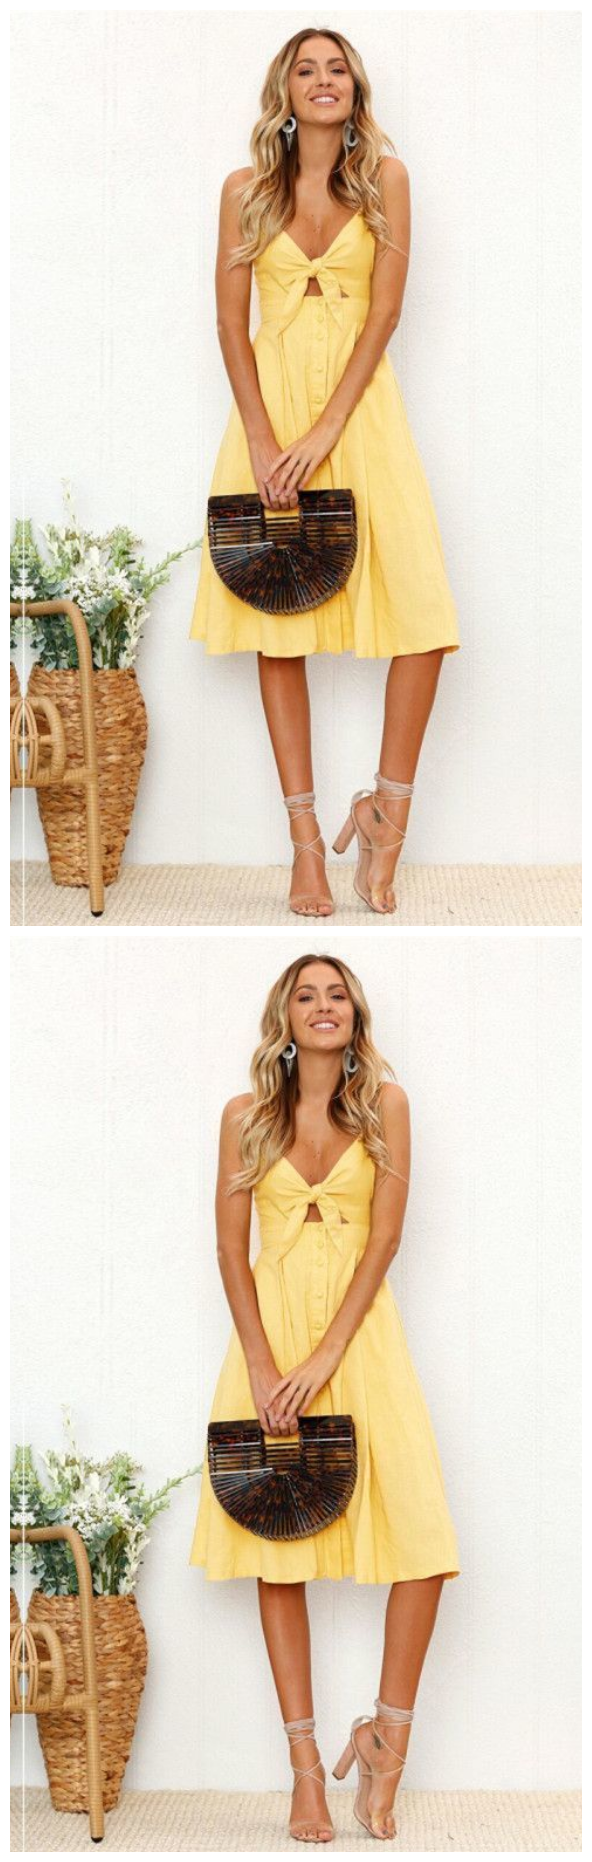 Cute Straps Yellow Tie Front Dress, Back to School Dress, Short Homecoming Dress   cg10080